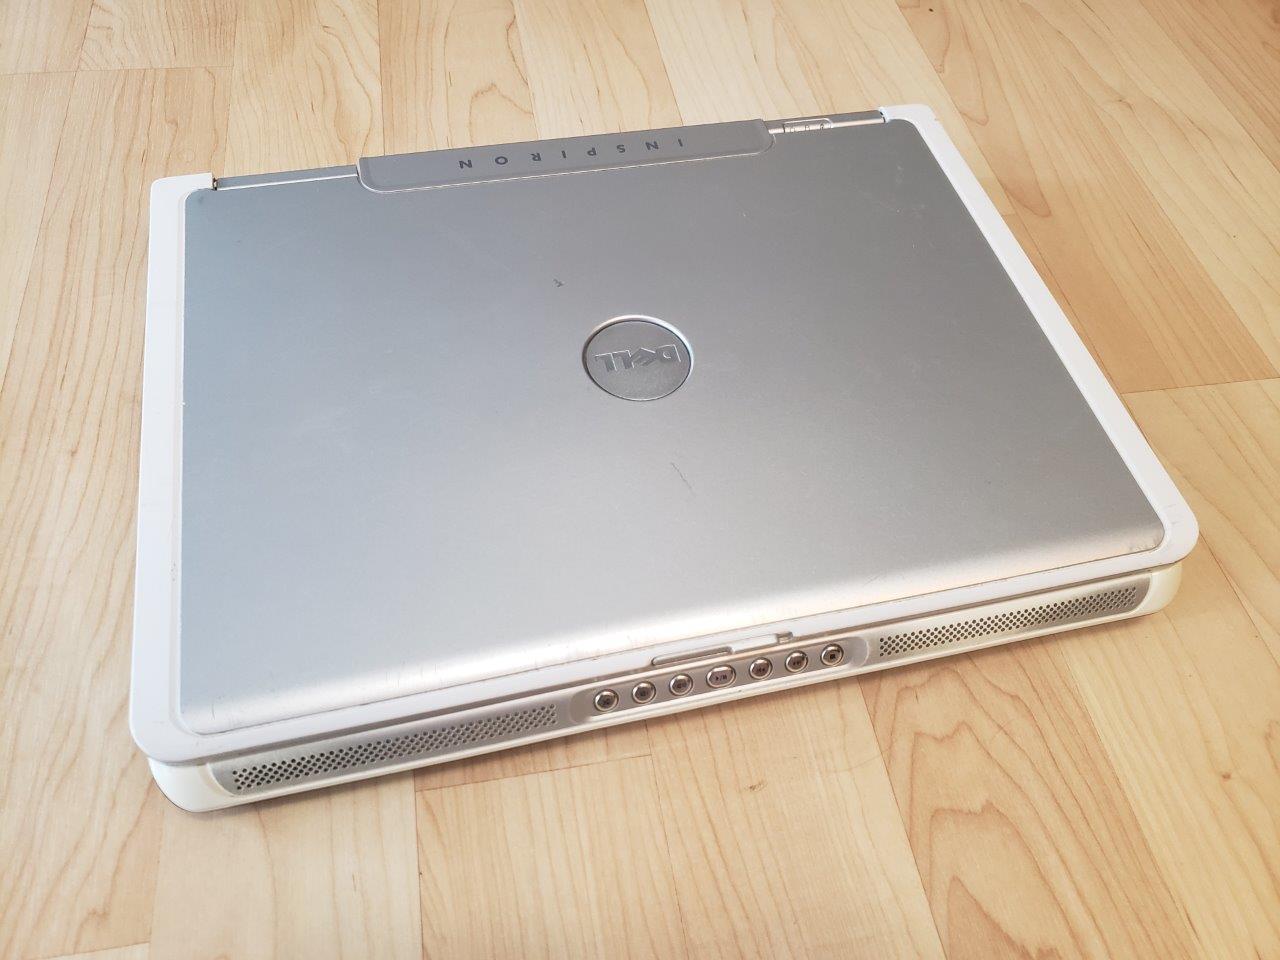 Dell Inspiron 6000 laptop Intel Centrino cpu WinXP/Pro COA hdd caddy for repairs or parts